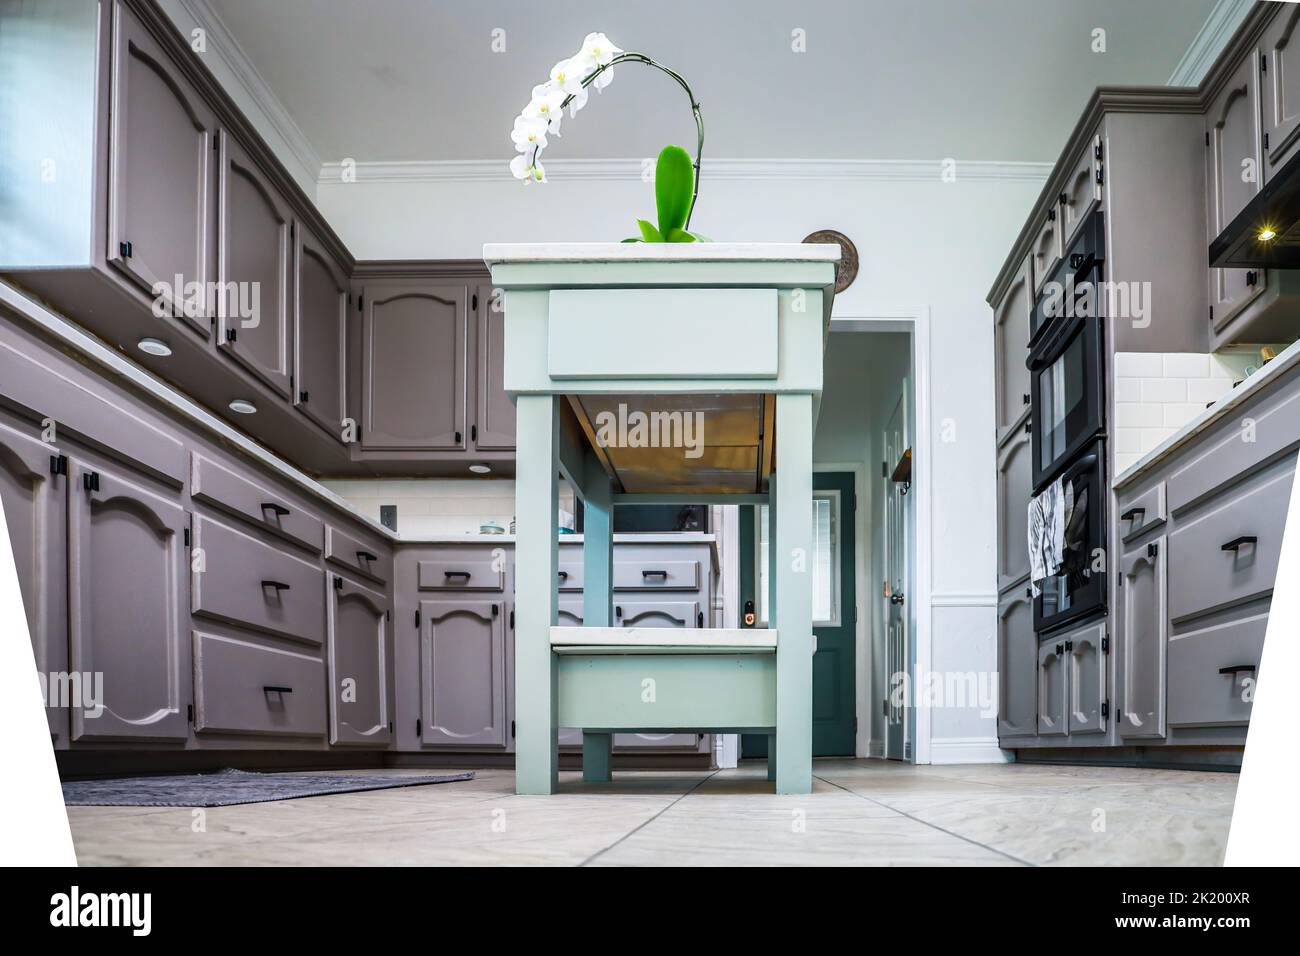 Low angle view of a renovated kitchen in an older home with painted gray cabinets, marble countertops, a small portable island and a tiled floor. Stock Photo